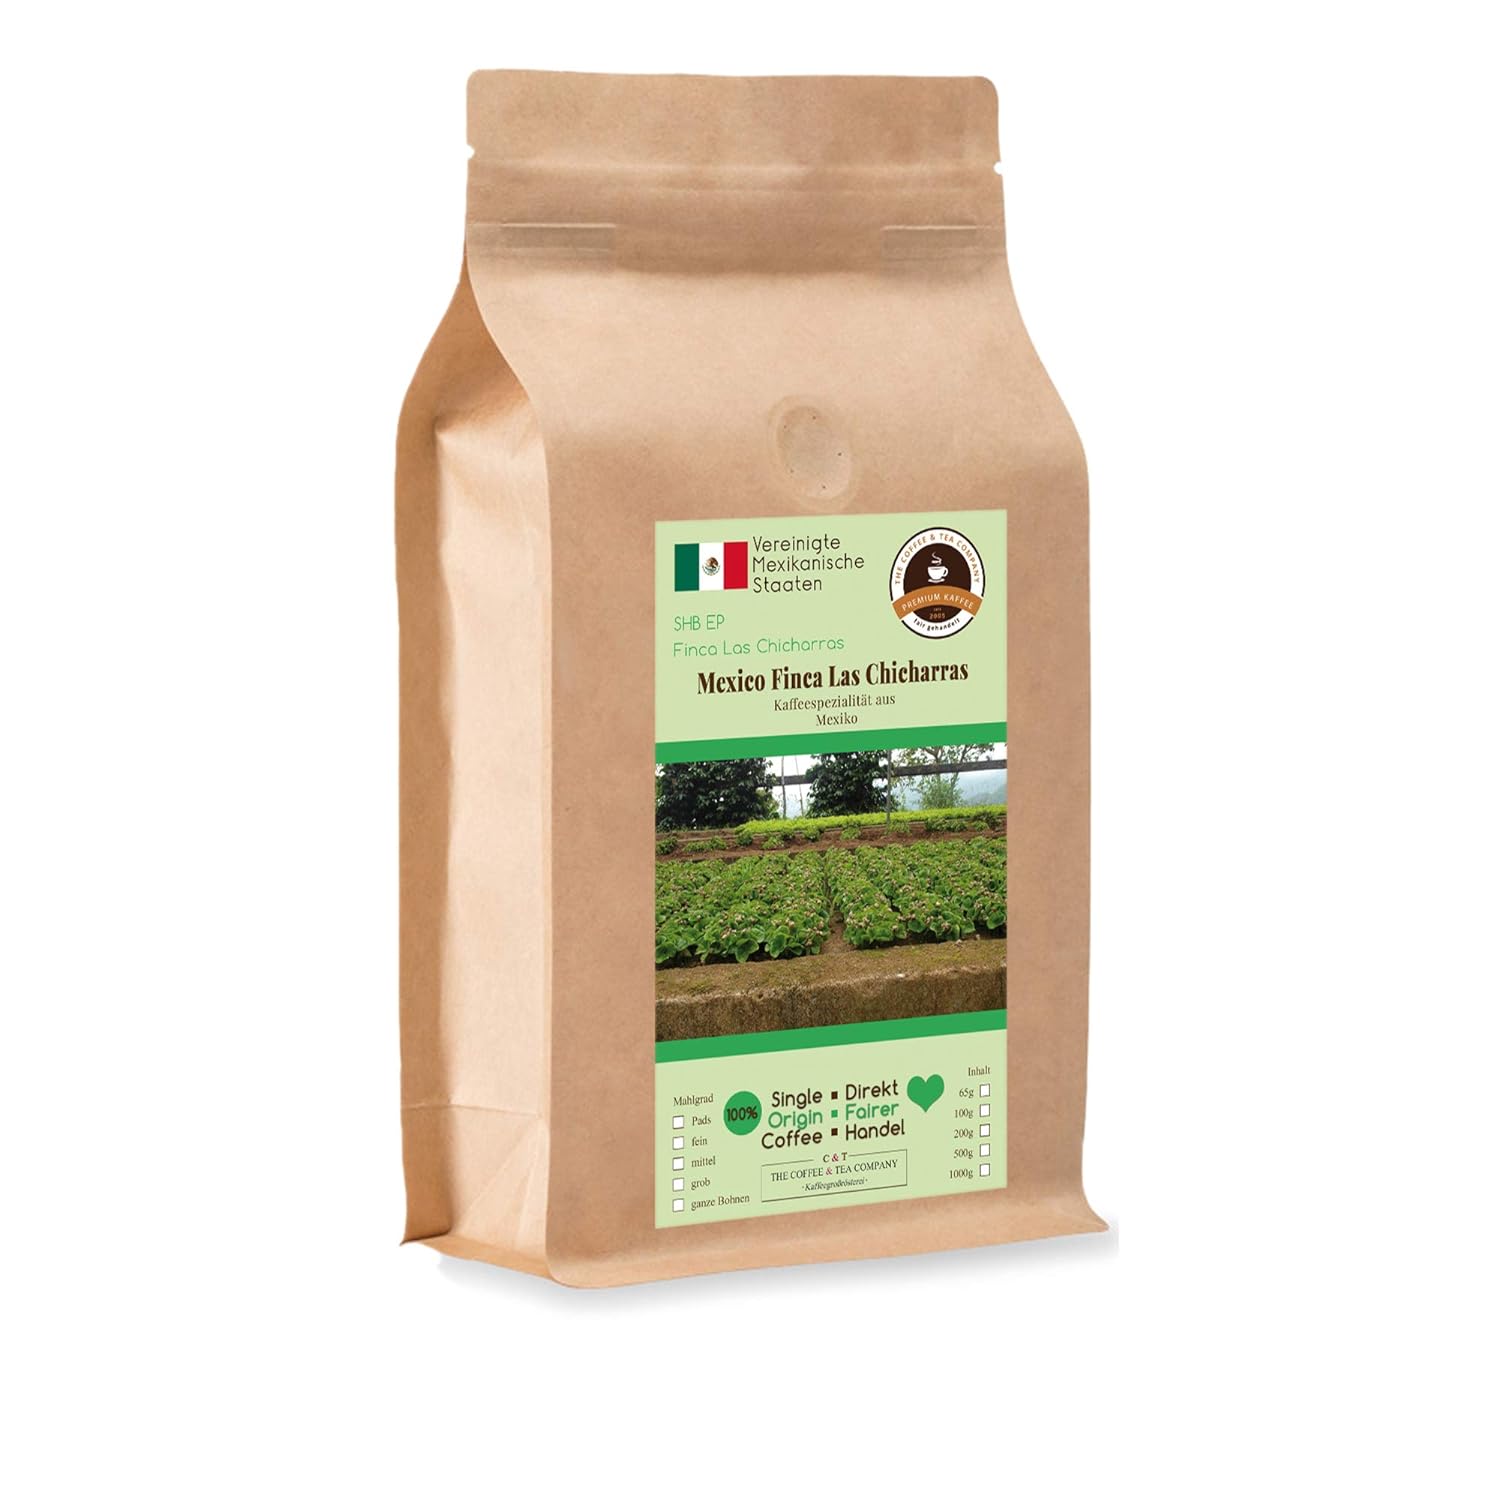 Coffee Globetrotter - Coffee with Heart - Mexico Finca Las Chicharras - 1000 g Finely Ground - for Espresso Maker, Espresso Machine - Top Coffee Fair Trade Supports Social Projects